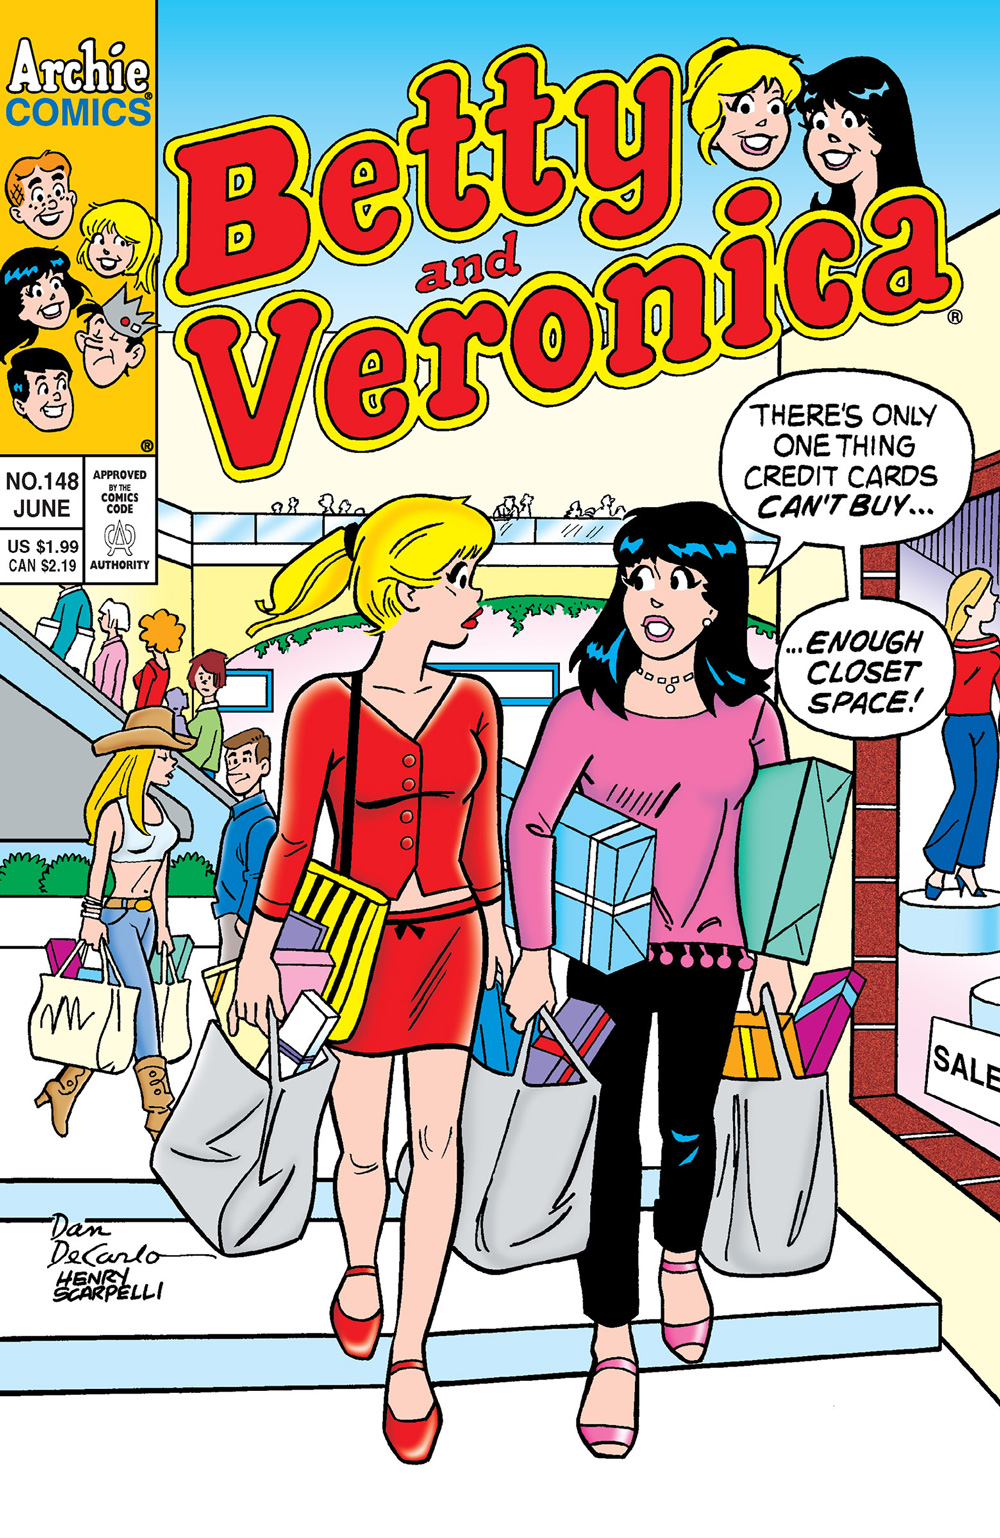 Betty and Veronica walk through a shopping mall carrying lots of bags. Veronica says credit cards can't buy enough closet space for all the stuff she just bought.